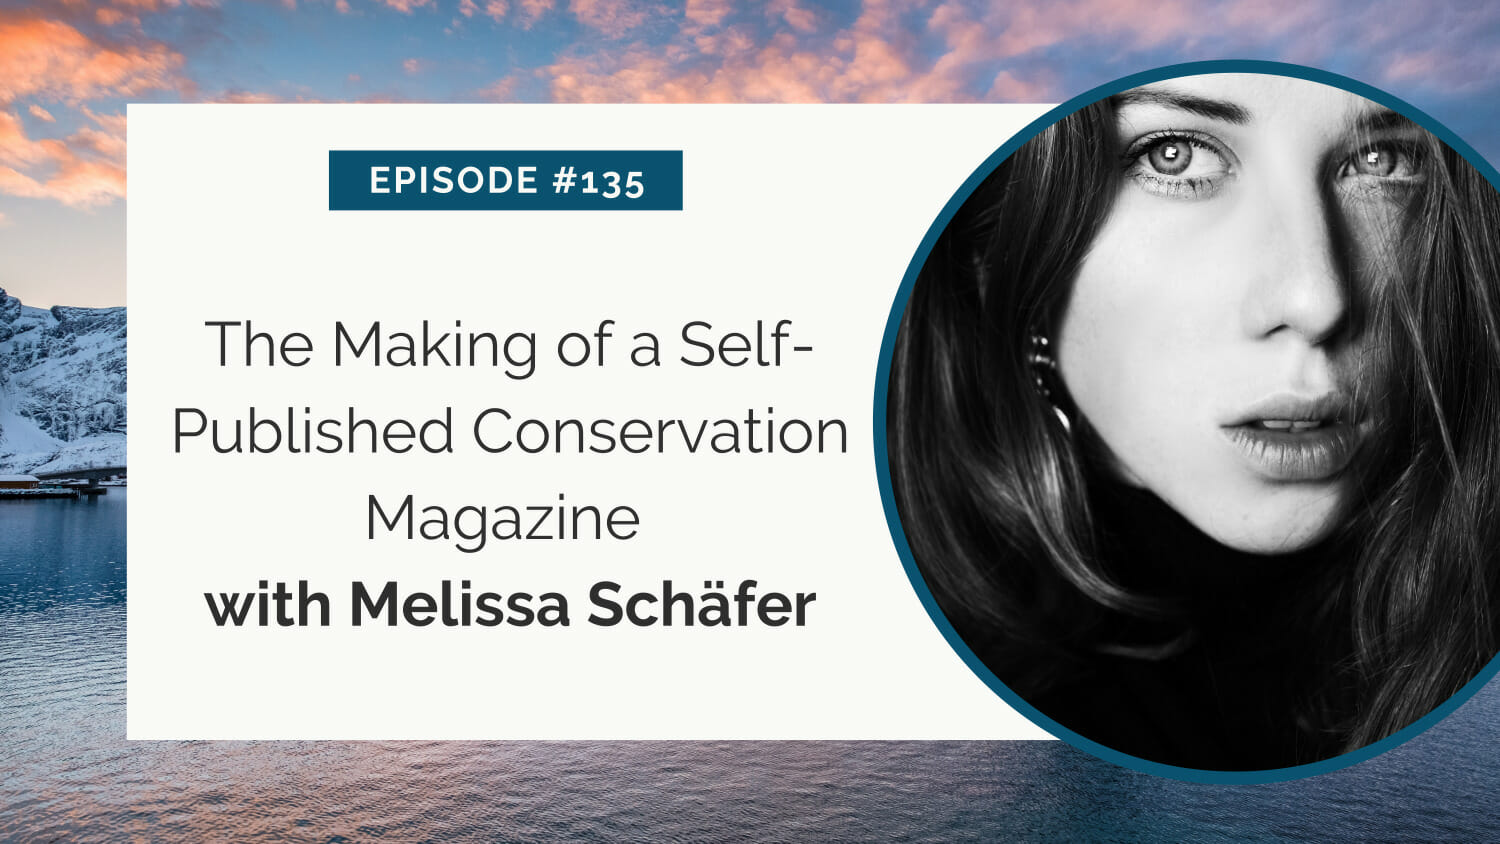 Promotional graphic for a podcast episode featuring melissa schäfer discussing the creation of a self-published conservation magazine.